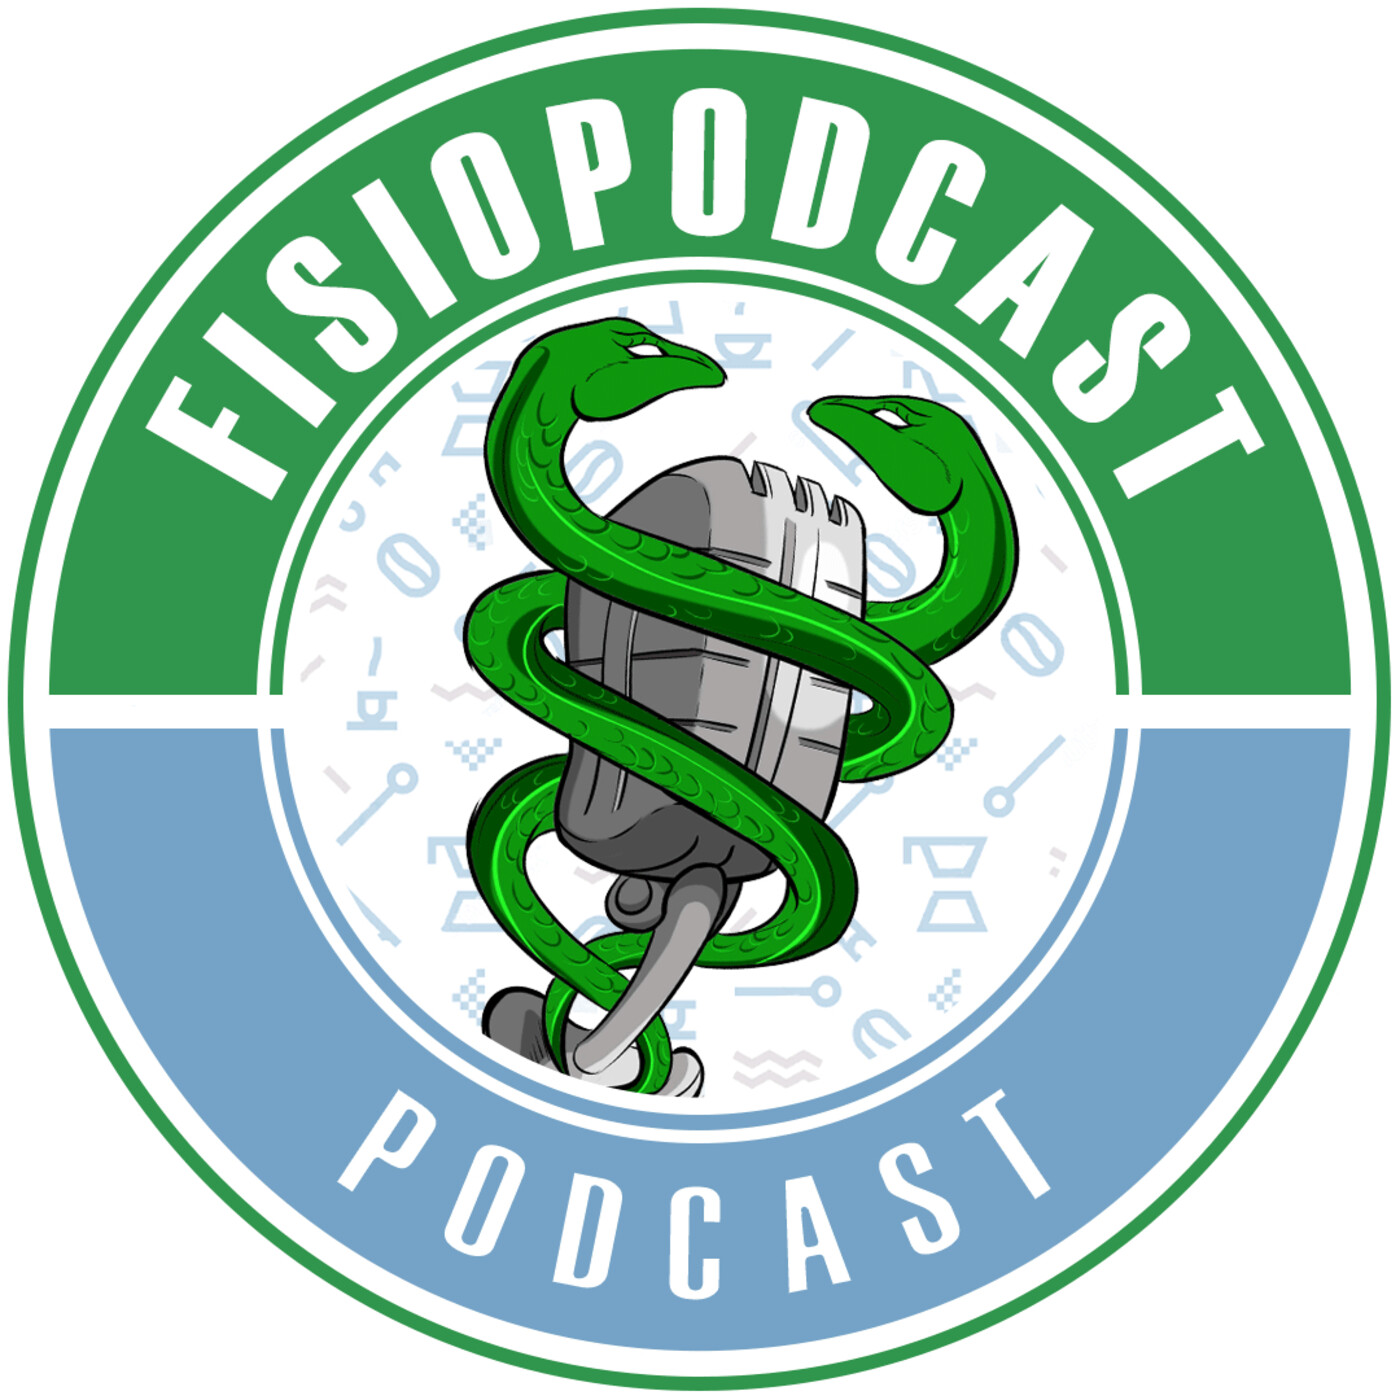 FisioPodcast